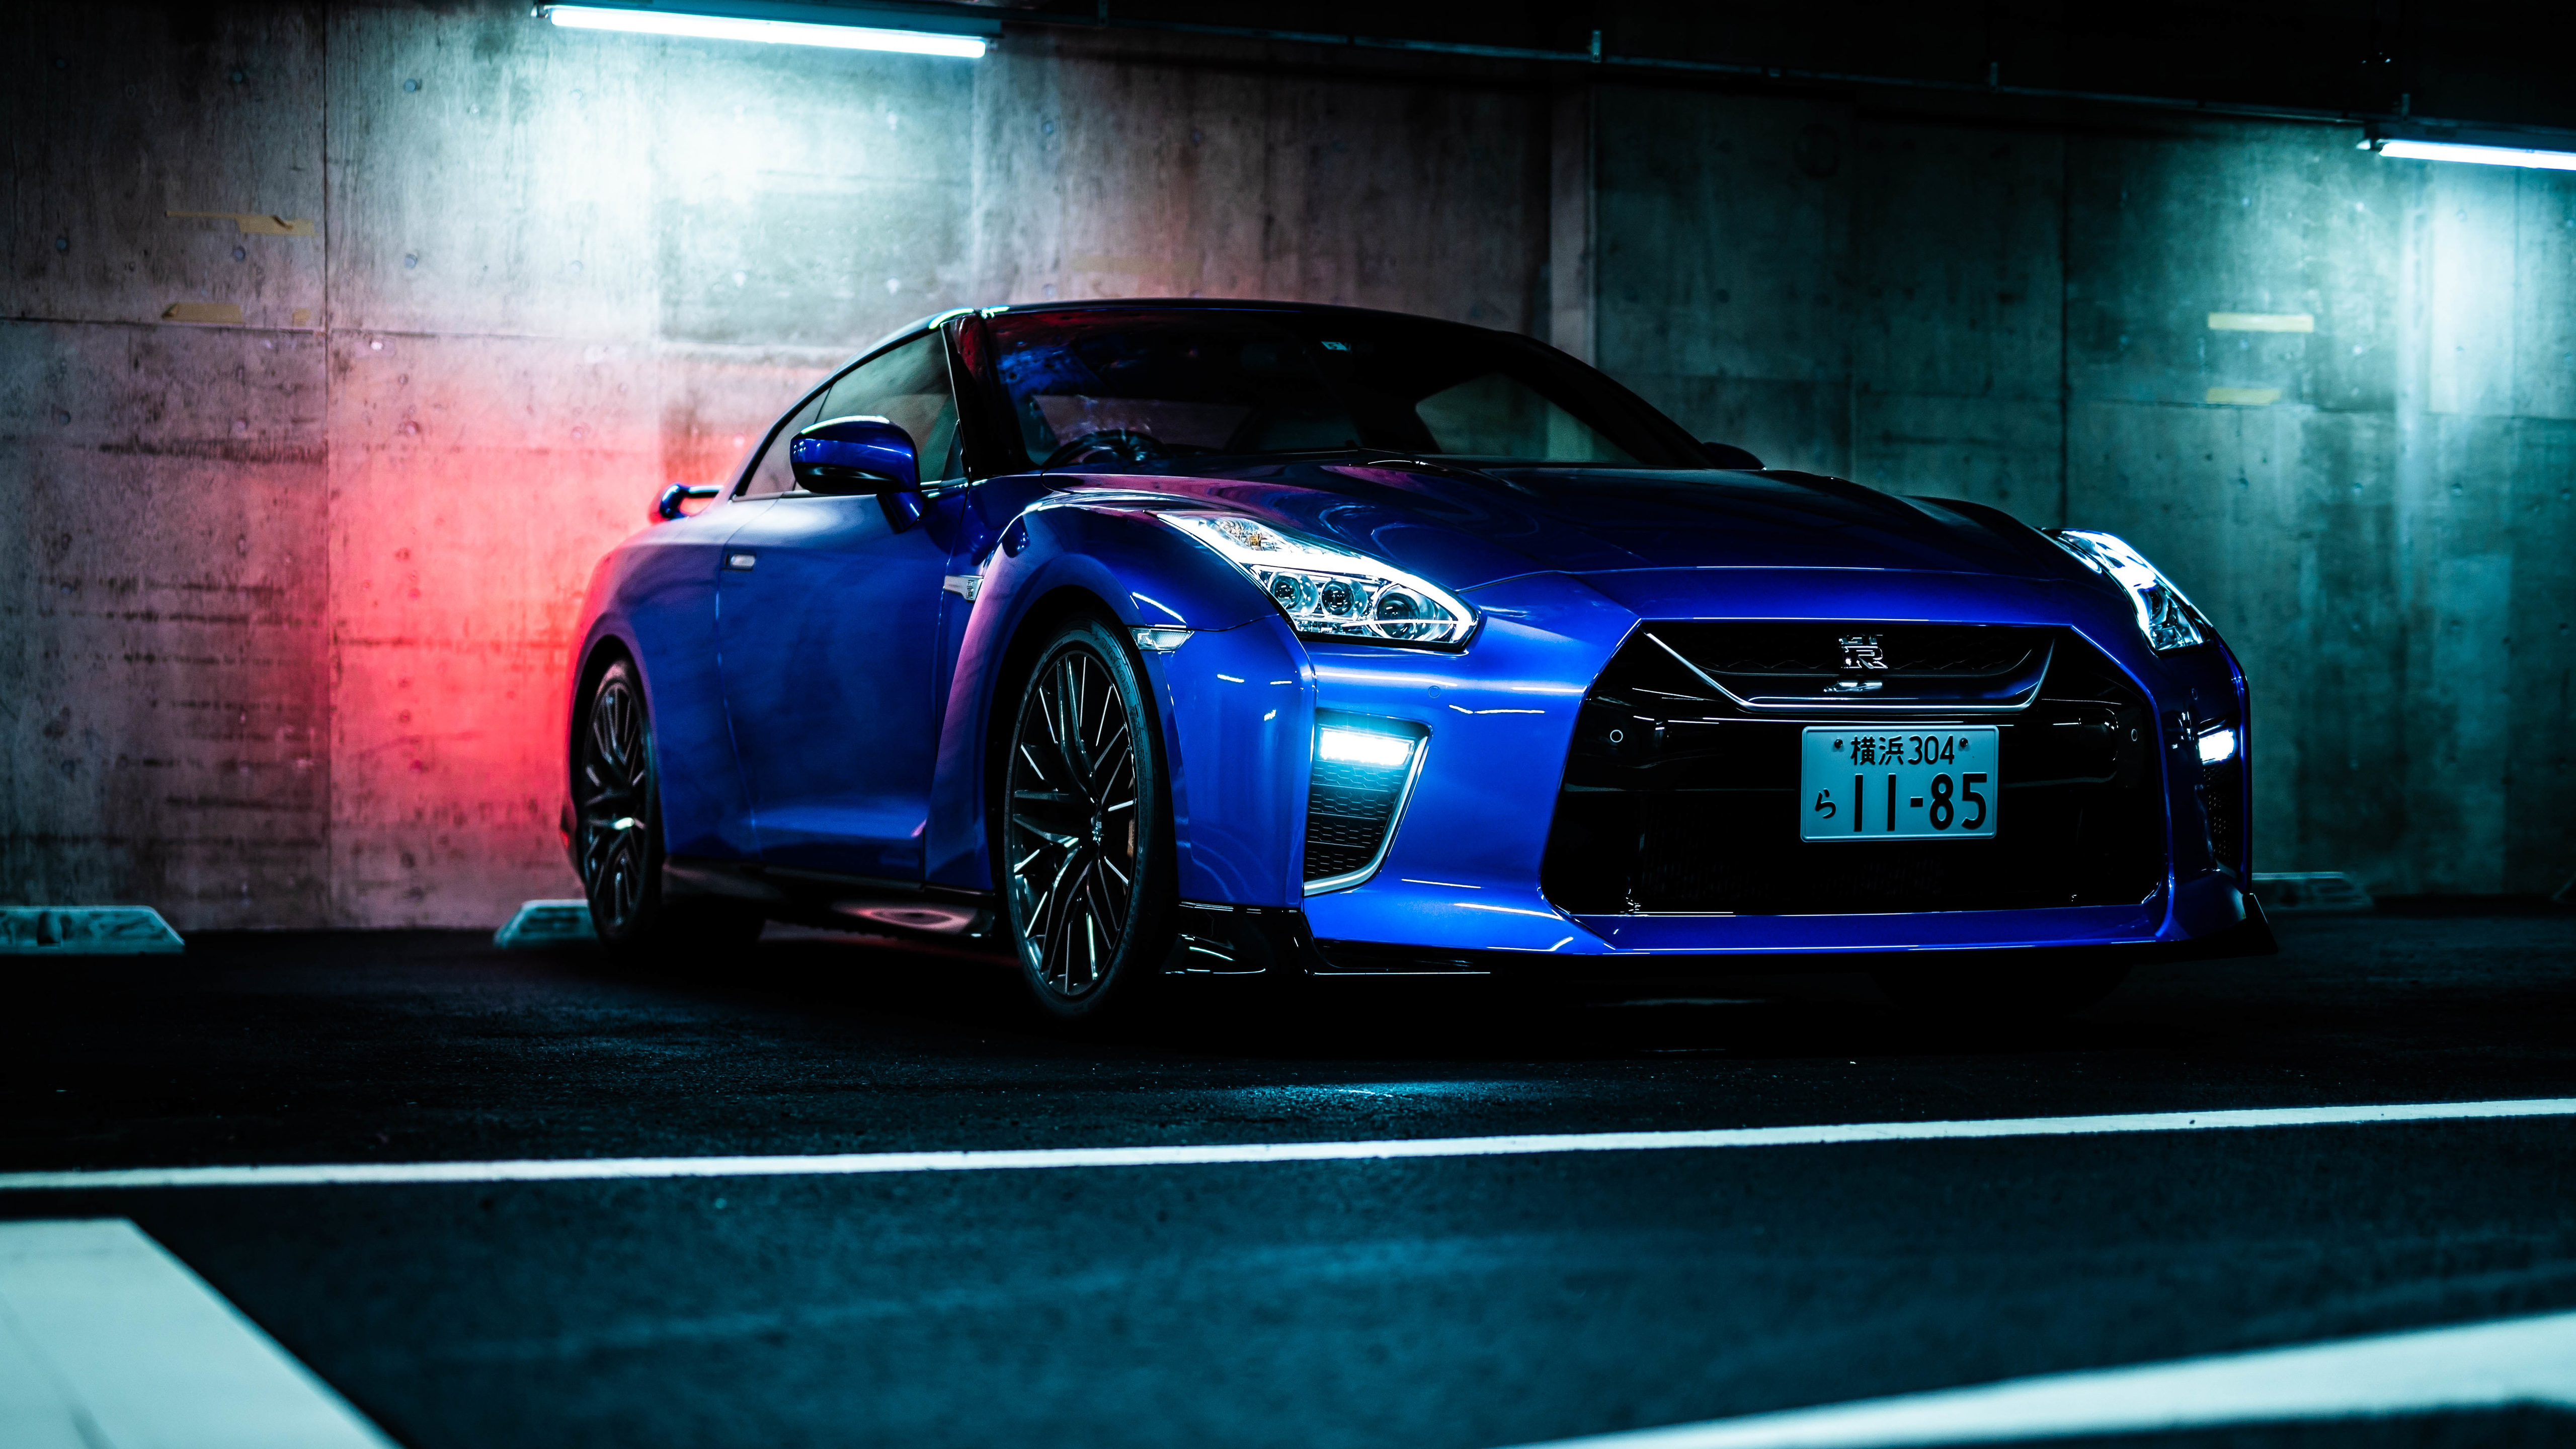 General 5120x2880 car vehicle parking lot low light supercars blue cars Nissan Nissan GT-R Japanese cars